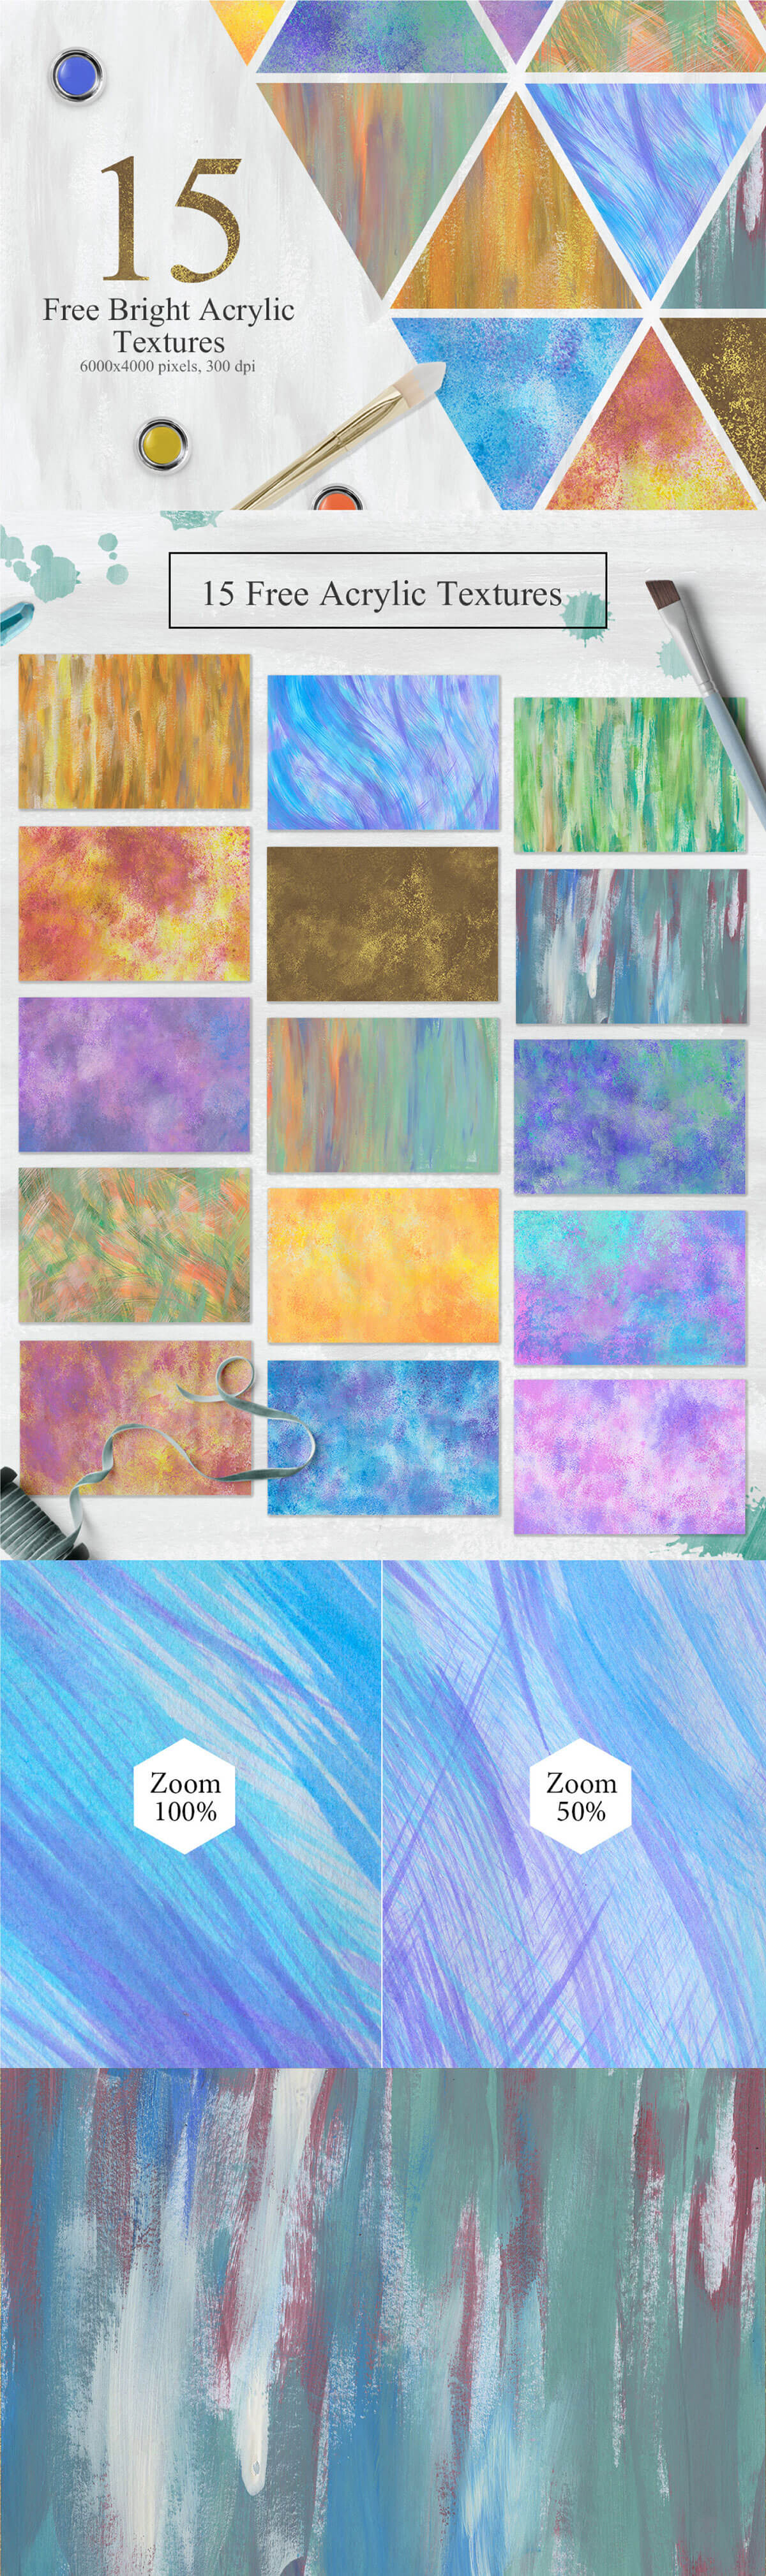 10 Free Acrylic Textures set can give trendy, hand-illustrated acrylic feel to any of your projects. These textures are high resolution, they’ll work great in print, web graphic, album art, concert poster/flyer, branding/identity imagery, packaging, patterns, cases, art, apps, invitations, decoration, and so more.    Big thanks to Nassy Art for sharing this awesome textures to our community.  <div class="sw-tweet-clear"></div><a class="swp_CTT style4" href="https://twitter.com/share?text=10+%23Free+%23Acrylic+%23Textures+set+can+give+trendy%2C+hand-illustrated+acrylic+feel+to+any+of+your+projects.&via=hicreativetacos&url=https://creativetacos.com/modern-abstract-acrylic-textures/" data-link="https://twitter.com/share?text=10+%23Free+%23Acrylic+%23Textures+set+can+give+trendy%2C+hand-illustrated+acrylic+feel+to+any+of+your+projects.&via=hicreativetacos&url=https://creativetacos.com/modern-abstract-acrylic-textures/" rel="nofollow noreferrer noopener" target="_blank"><span class="sw-click-to-tweet"><span class="sw-ctt-text">10 Free Acrylic Teẋtures set can give trendy, hand-illustrated acrylic feel to any of your projects.</span><span class="sw-ctt-btn">Click To Tweet<i class="sw swp_twitter_icon"></i></span></span></a>  Included With Acrylic Textures Format: JPG Resolution: 6000 × 4000 px at 300 DPI File Size: 46 MB License: Free For Personal & Commercial Use Author: Nassy Art  
		<a href="https://creativetacos.com/GET/10-free-acrylic-textures/" class="dlm-buttons-button dlm-buttons-button-mybuttons" style="display:block;padding:.75em 1em;text-align:center;text-decoration:none;border: 1px solid #74ccc6;border-radius:5px;font-family:Georgia;font-size:23px;color:#ffffff;background:#53ccc3;background: linear-gradient(to bottom, #53ccc3,#6ecdc7);"><strong>Download (1454) </strong></a>
		  <div class="su-button-center"><a href="https://crmrkt.com/6K3ey6" class="su-button su-button-style-3d su-button-wide" style="color:#FFFFFF;background-color:#f14c2f;border-color:#c13d26;border-radius:10px;-moz-border-radius:10px;-webkit-border-radius:10px" target="_blank" rel="noopener noreferrer"><span style="color:#FFFFFF;padding:0px 26px;font-size:20px;line-height:40px;border-color:#f6826e;border-radius:10px;-moz-border-radius:10px;-webkit-border-radius:10px;text-shadow:none;-moz-text-shadow:none;-webkit-text-shadow:none"> Purchase Full Version On Creative Market</span></a></div>